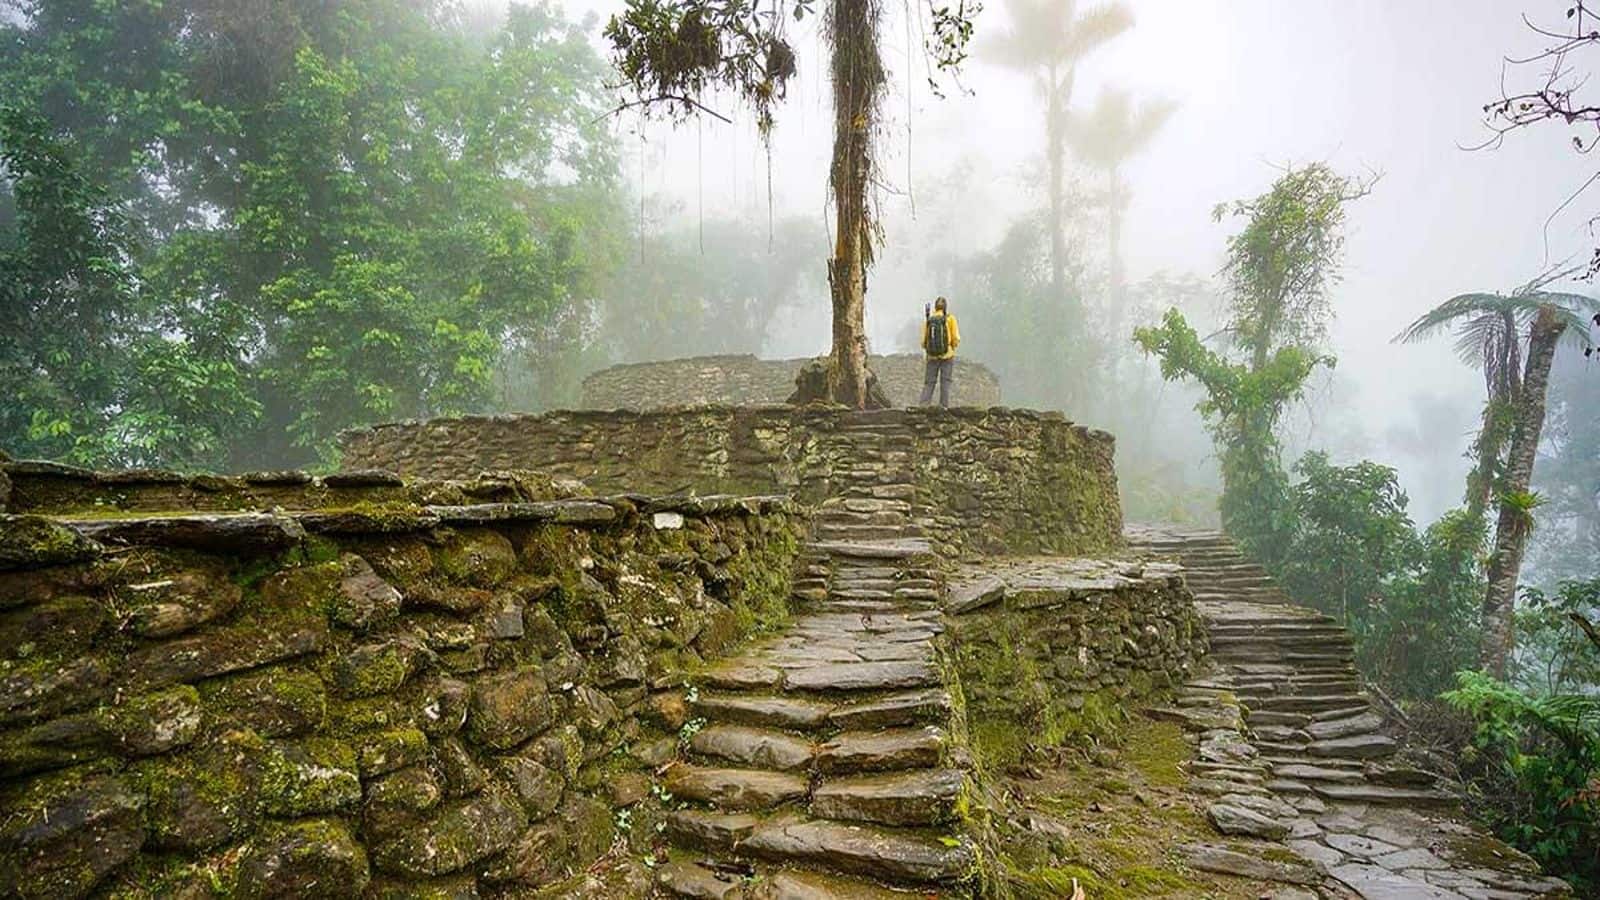 Hop on a journey to Colombia's enigmatic Lost City